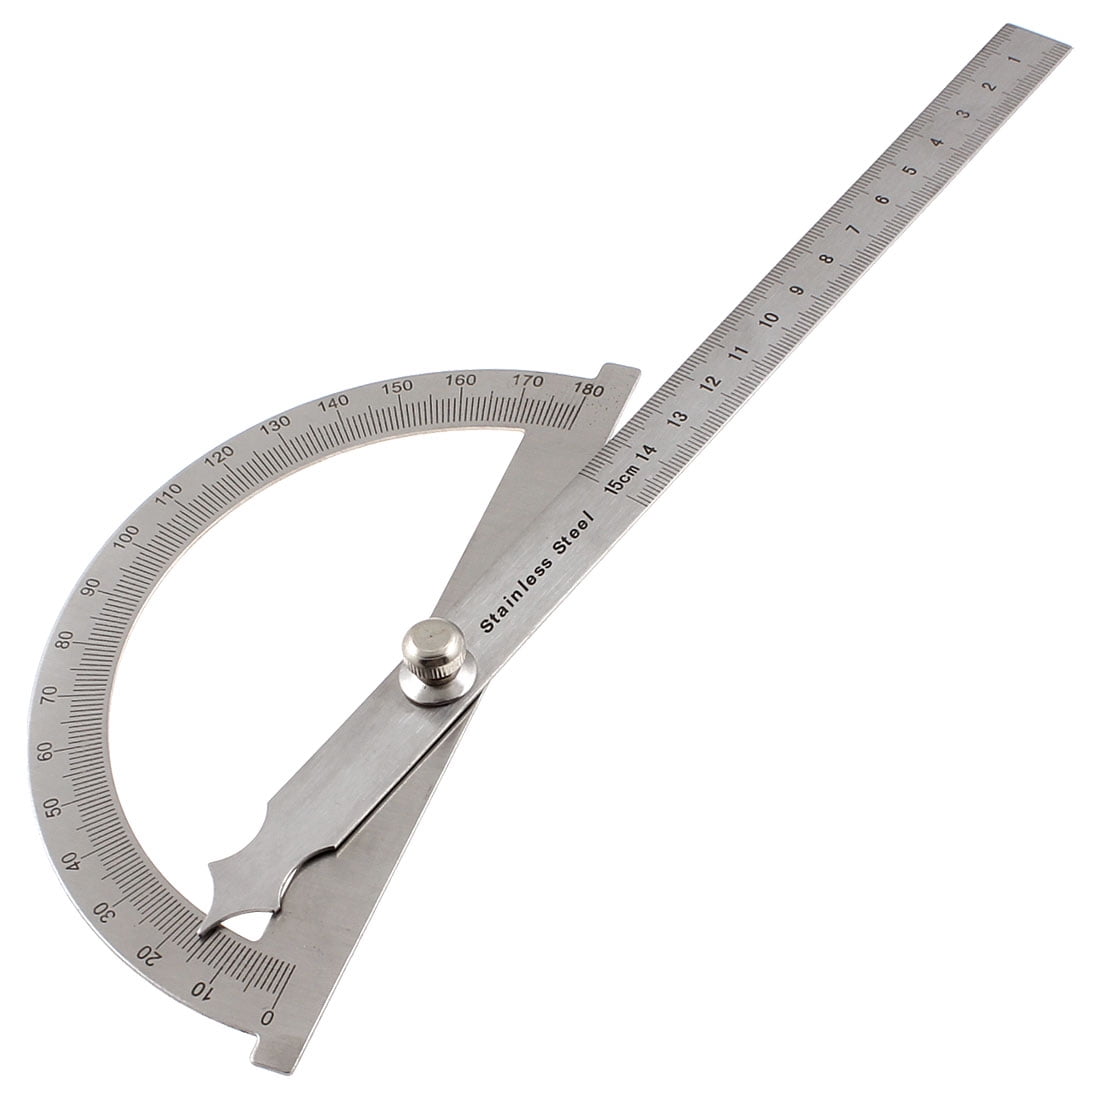 6 Inch / 15cm 180 Degree Assorted Colors Shatter-Resistant Swing Arm Protractor 